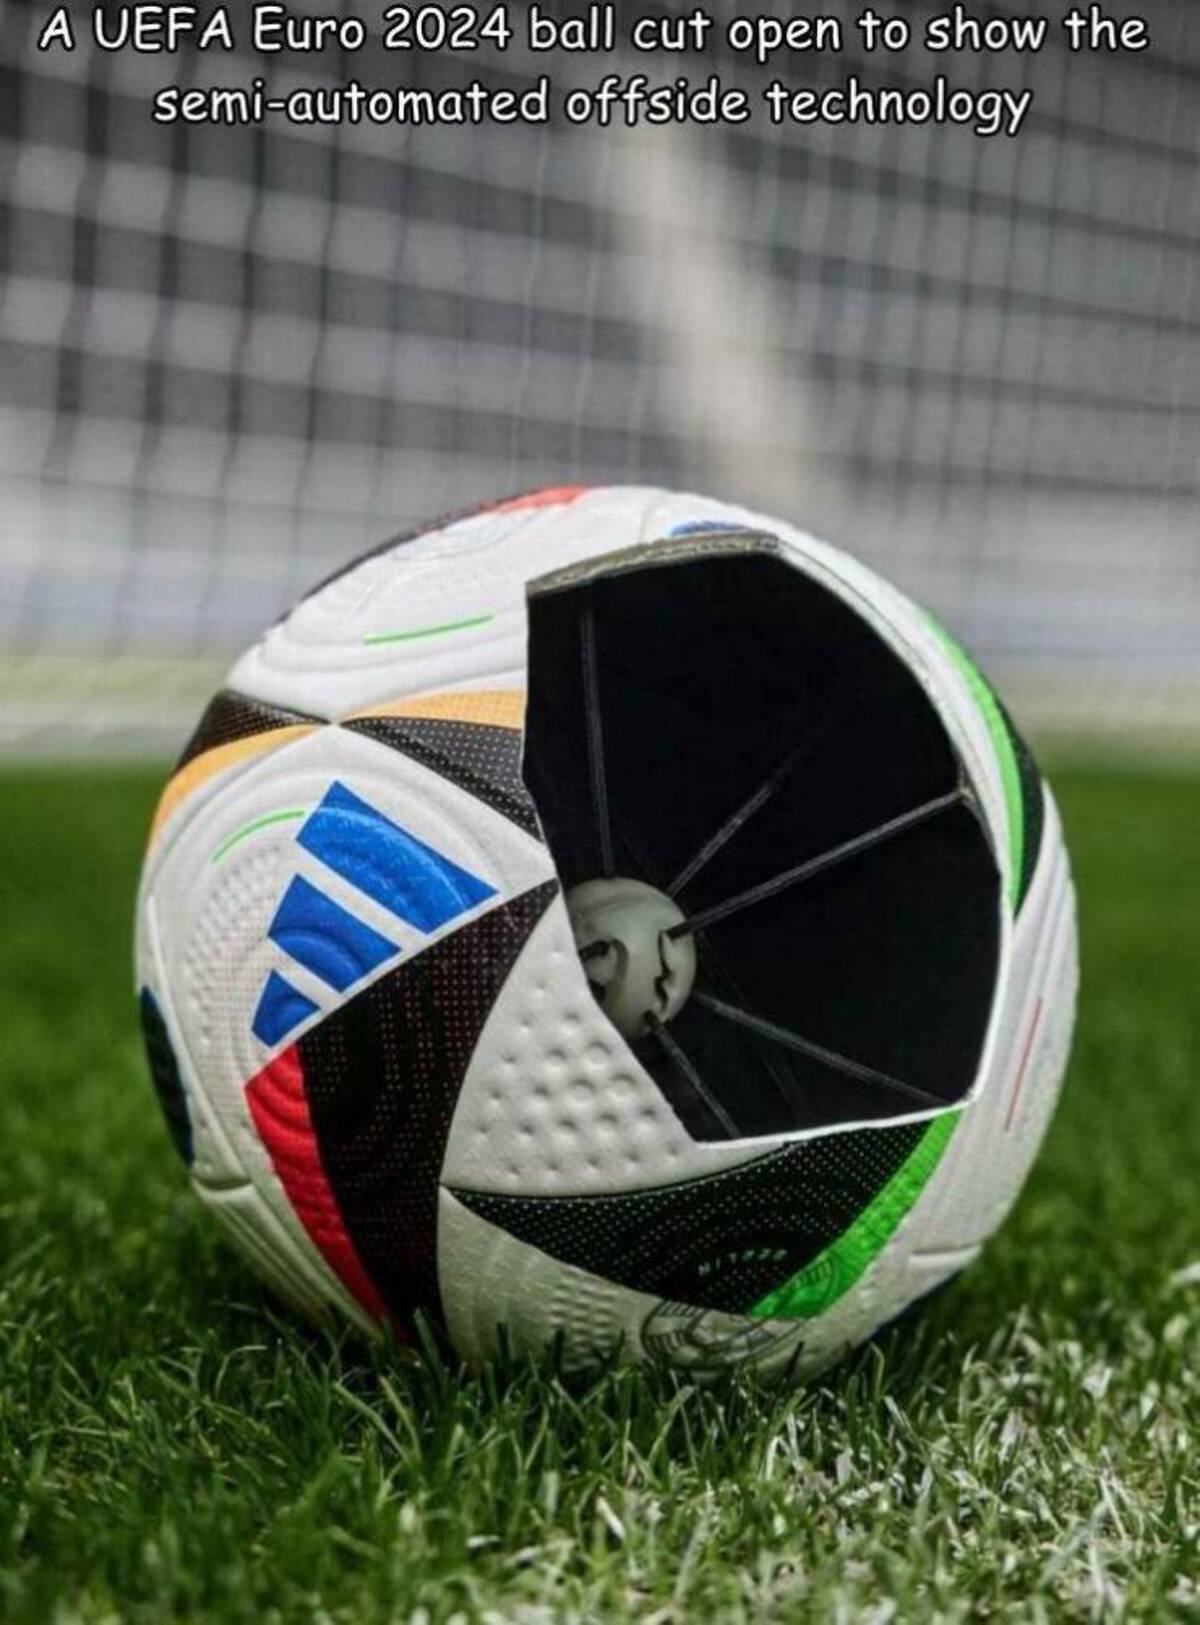 ball - A Uefa Euro 2024 ball cut open to show the semiautomated offside technology